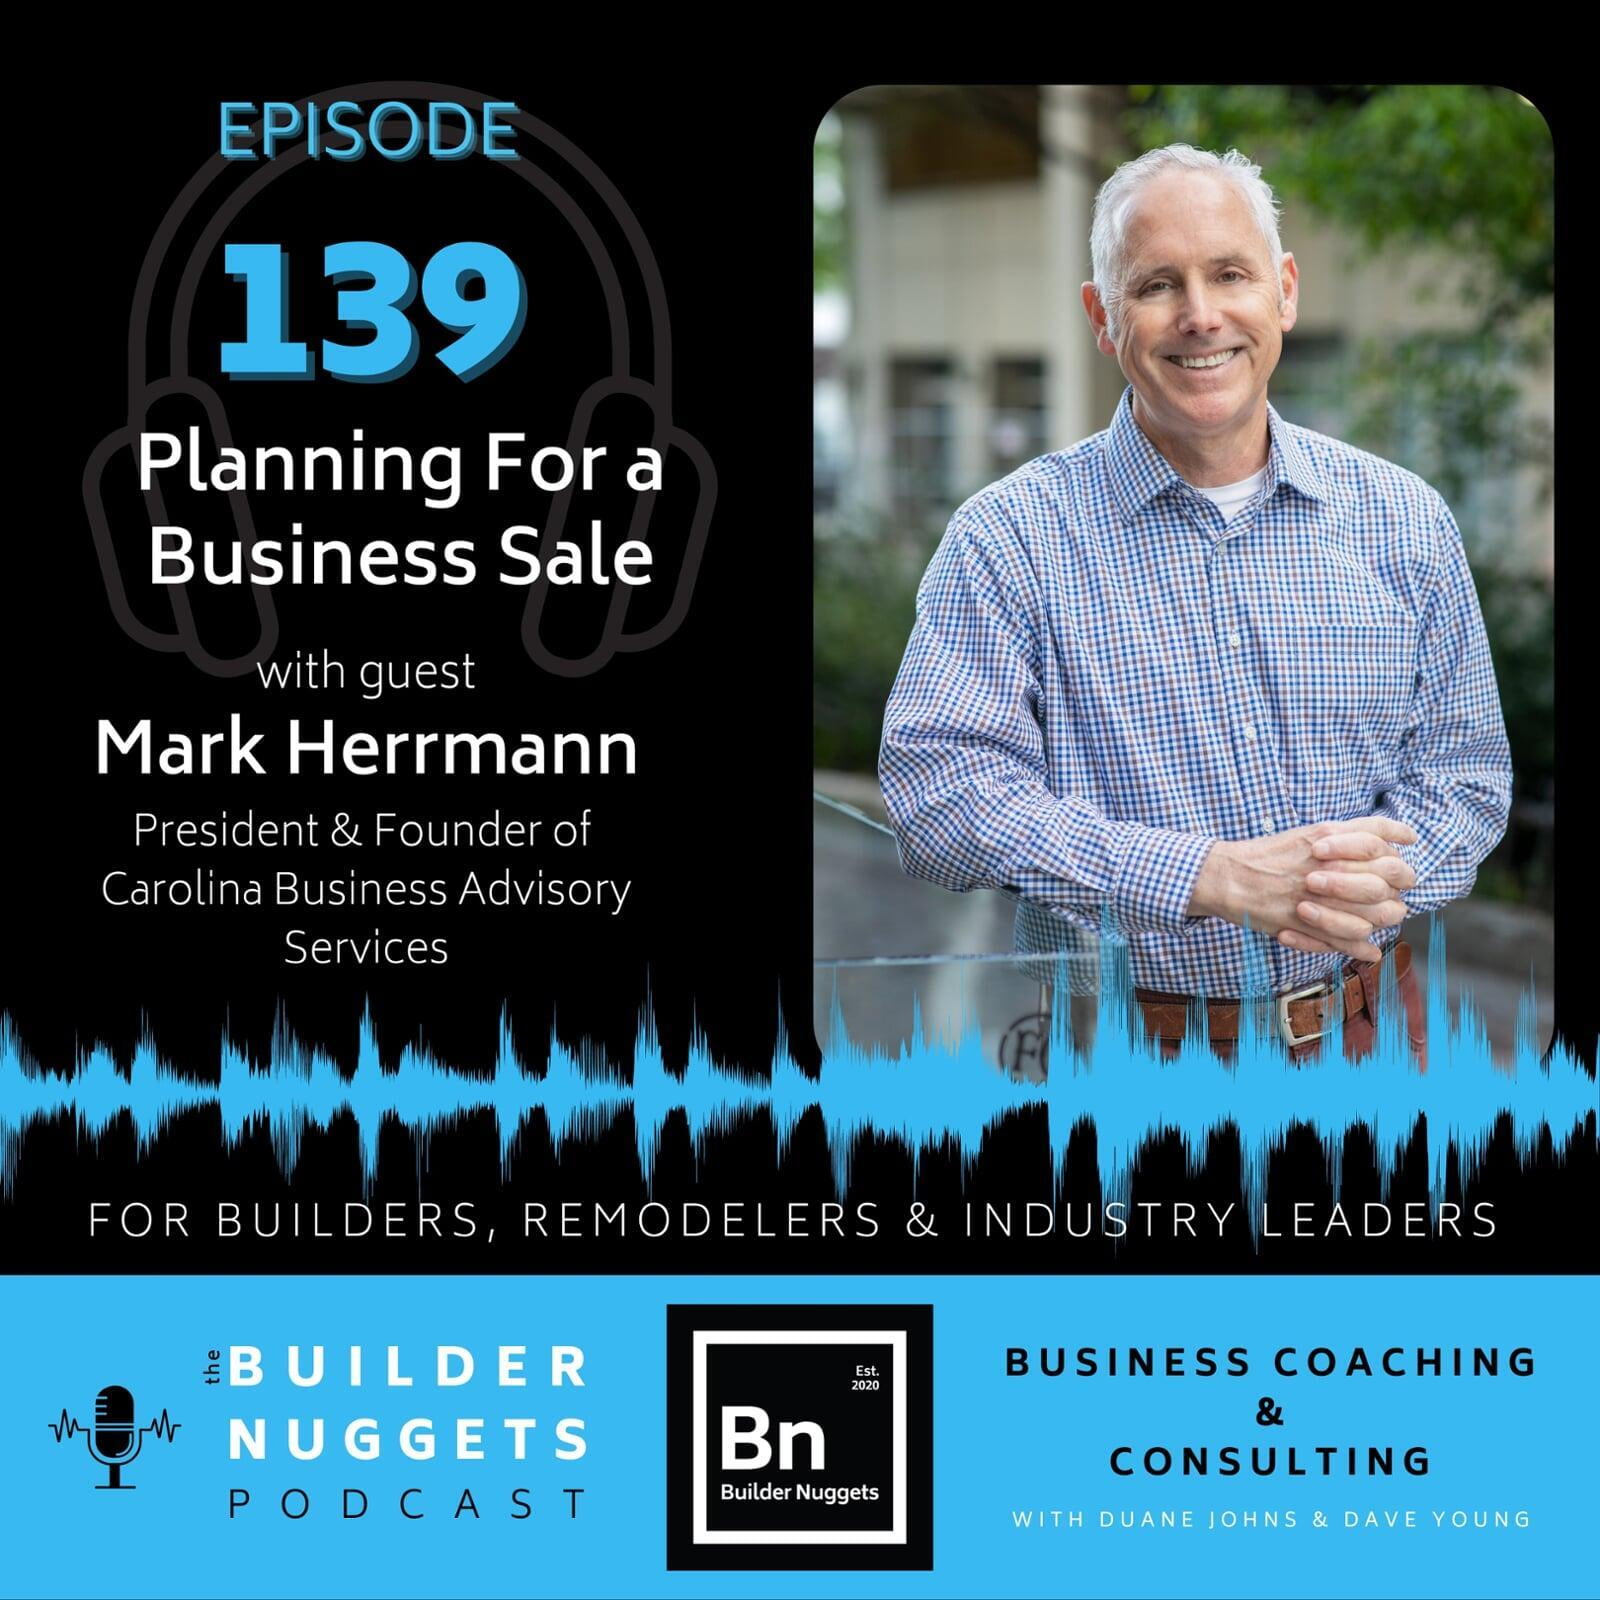 The Builder Nuggets podcast with guest Mark Herrmann 